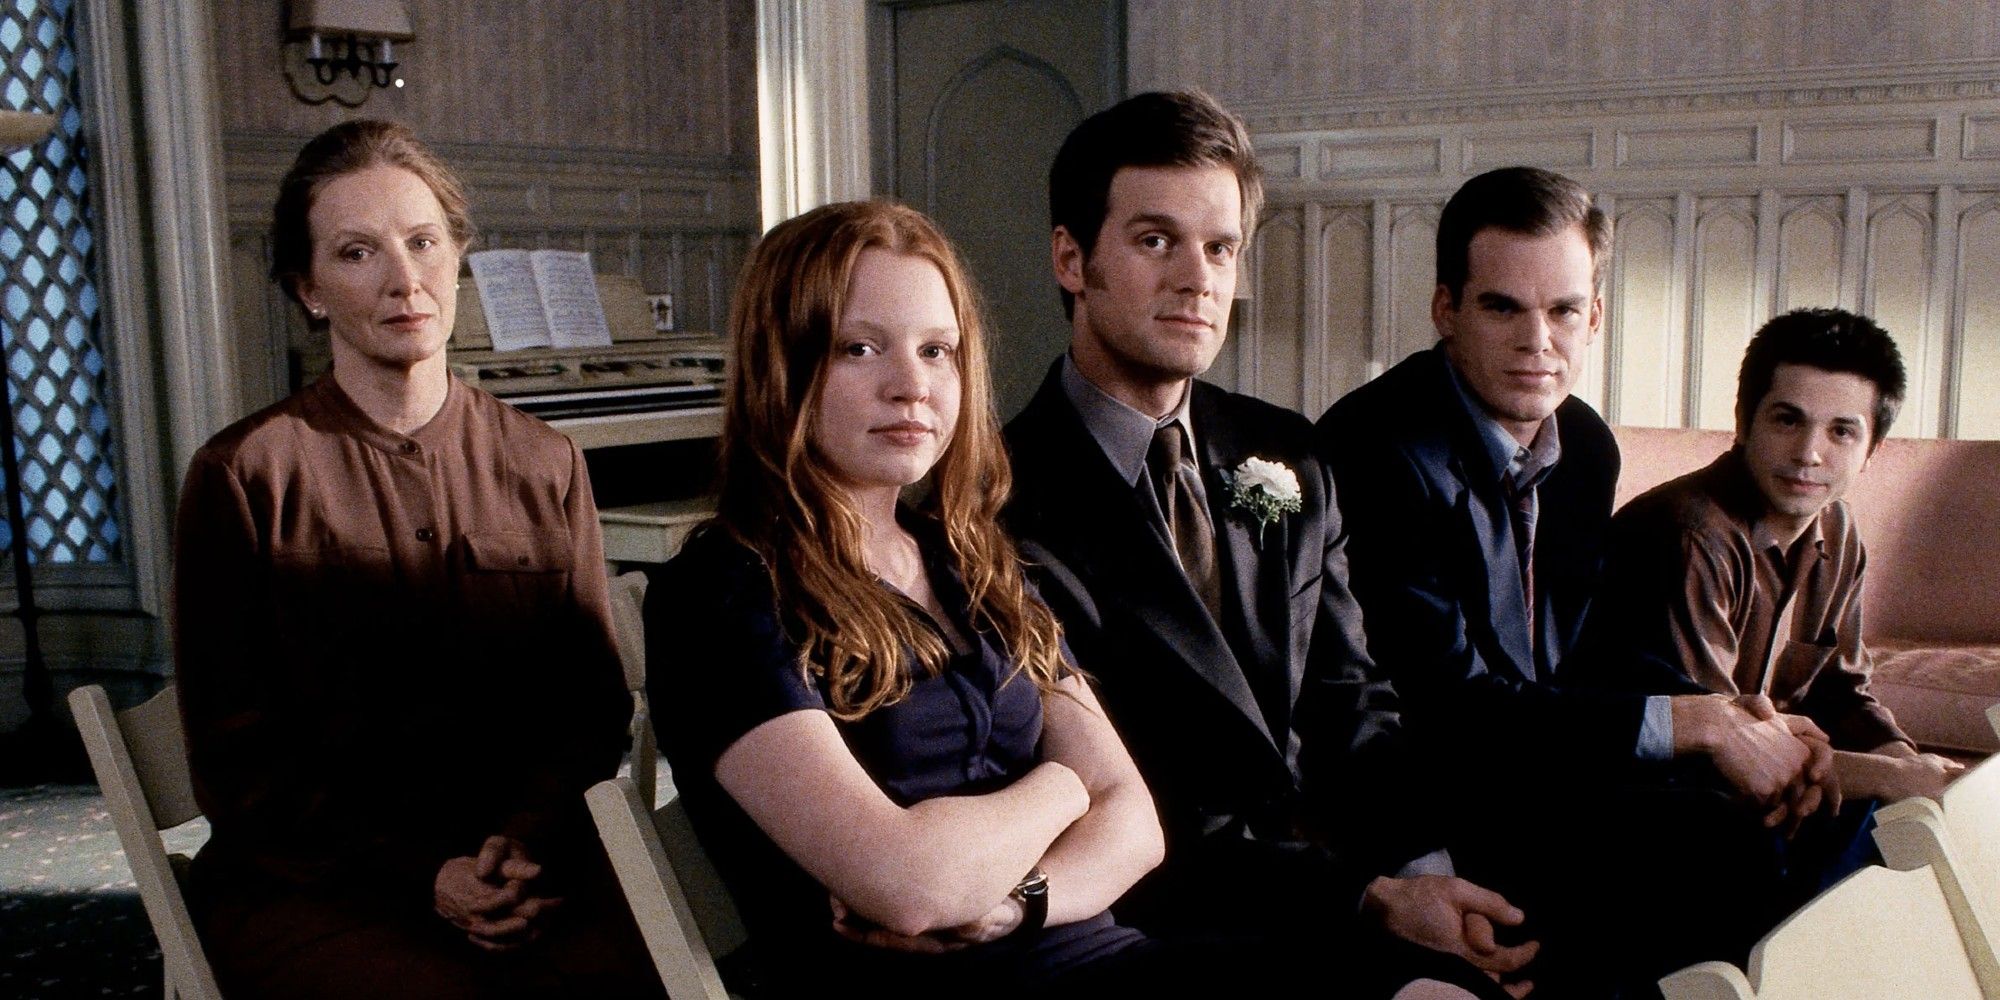 Frances Conroy, Lauren Ambrose, Peter Krause, Michael C. Hall, and Freddy Rodríguez in 'Six Feet Under'